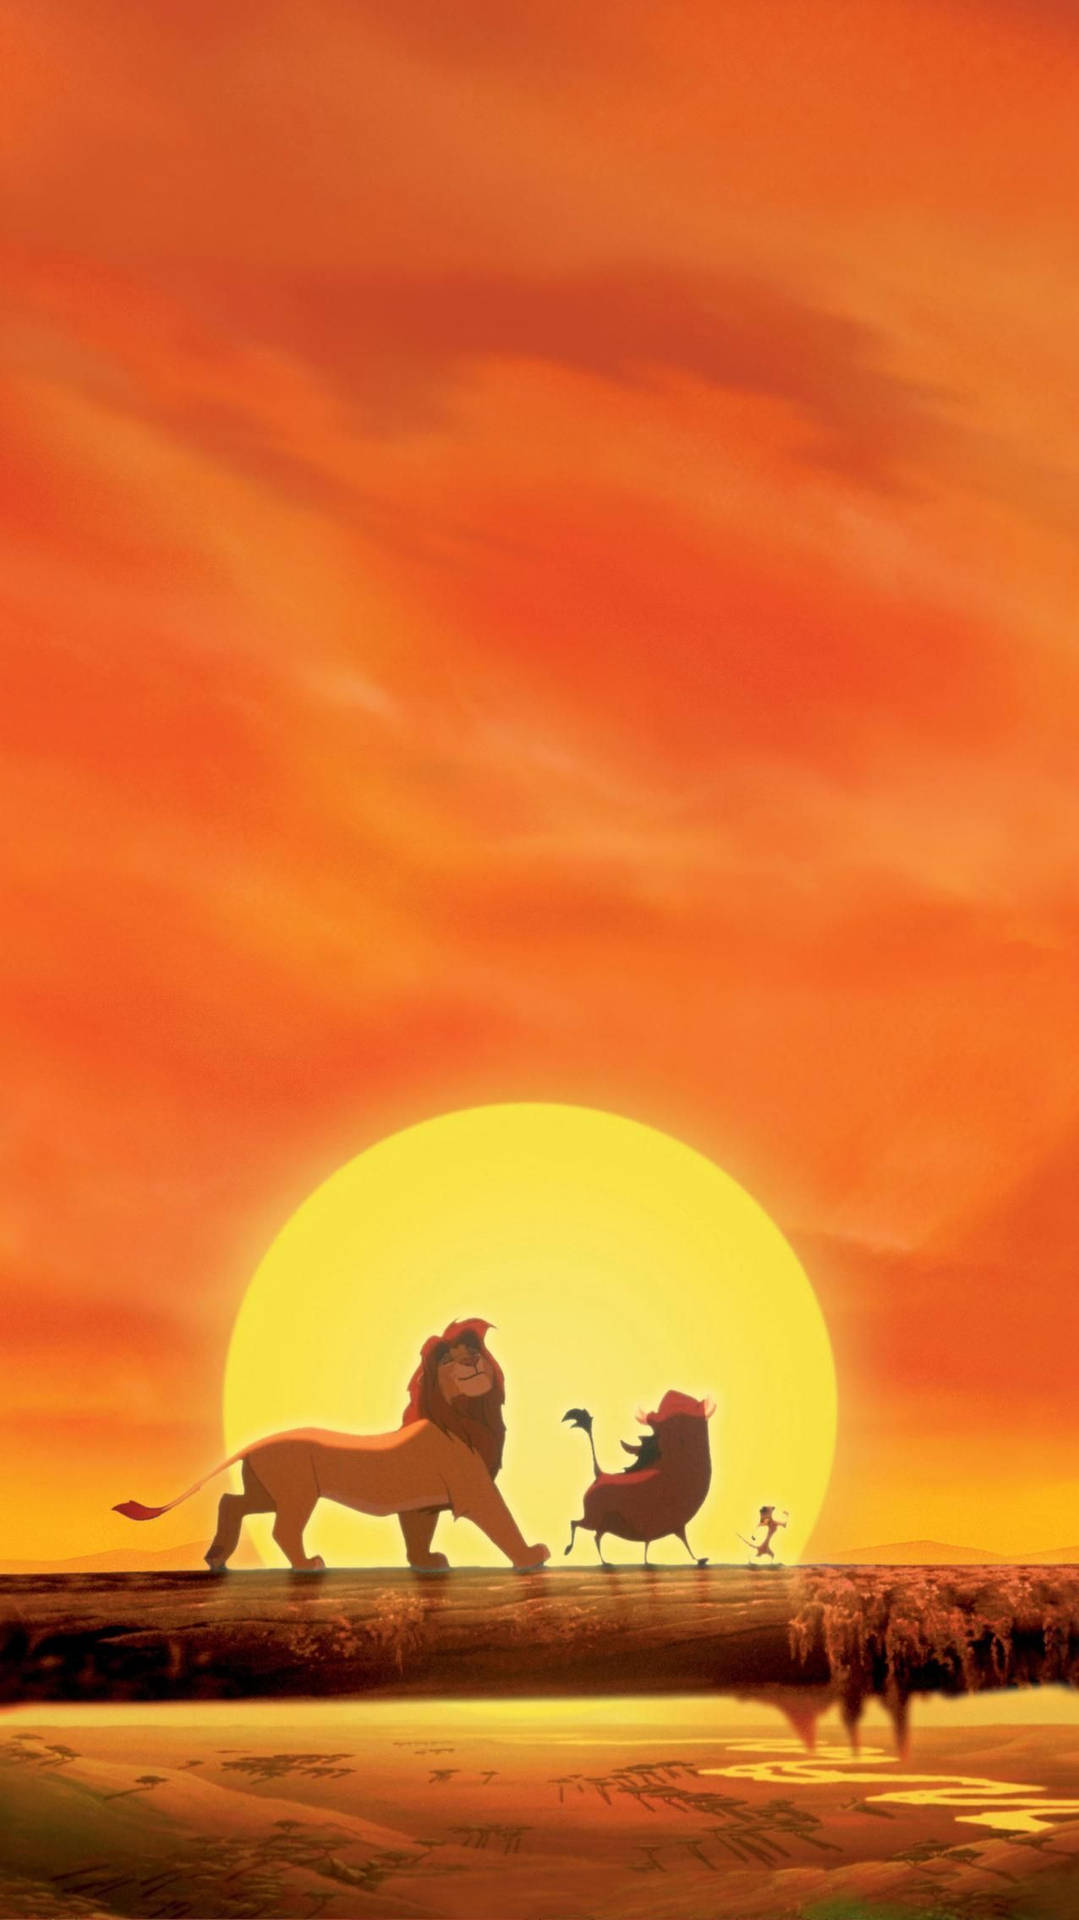 The Lion King Sunset